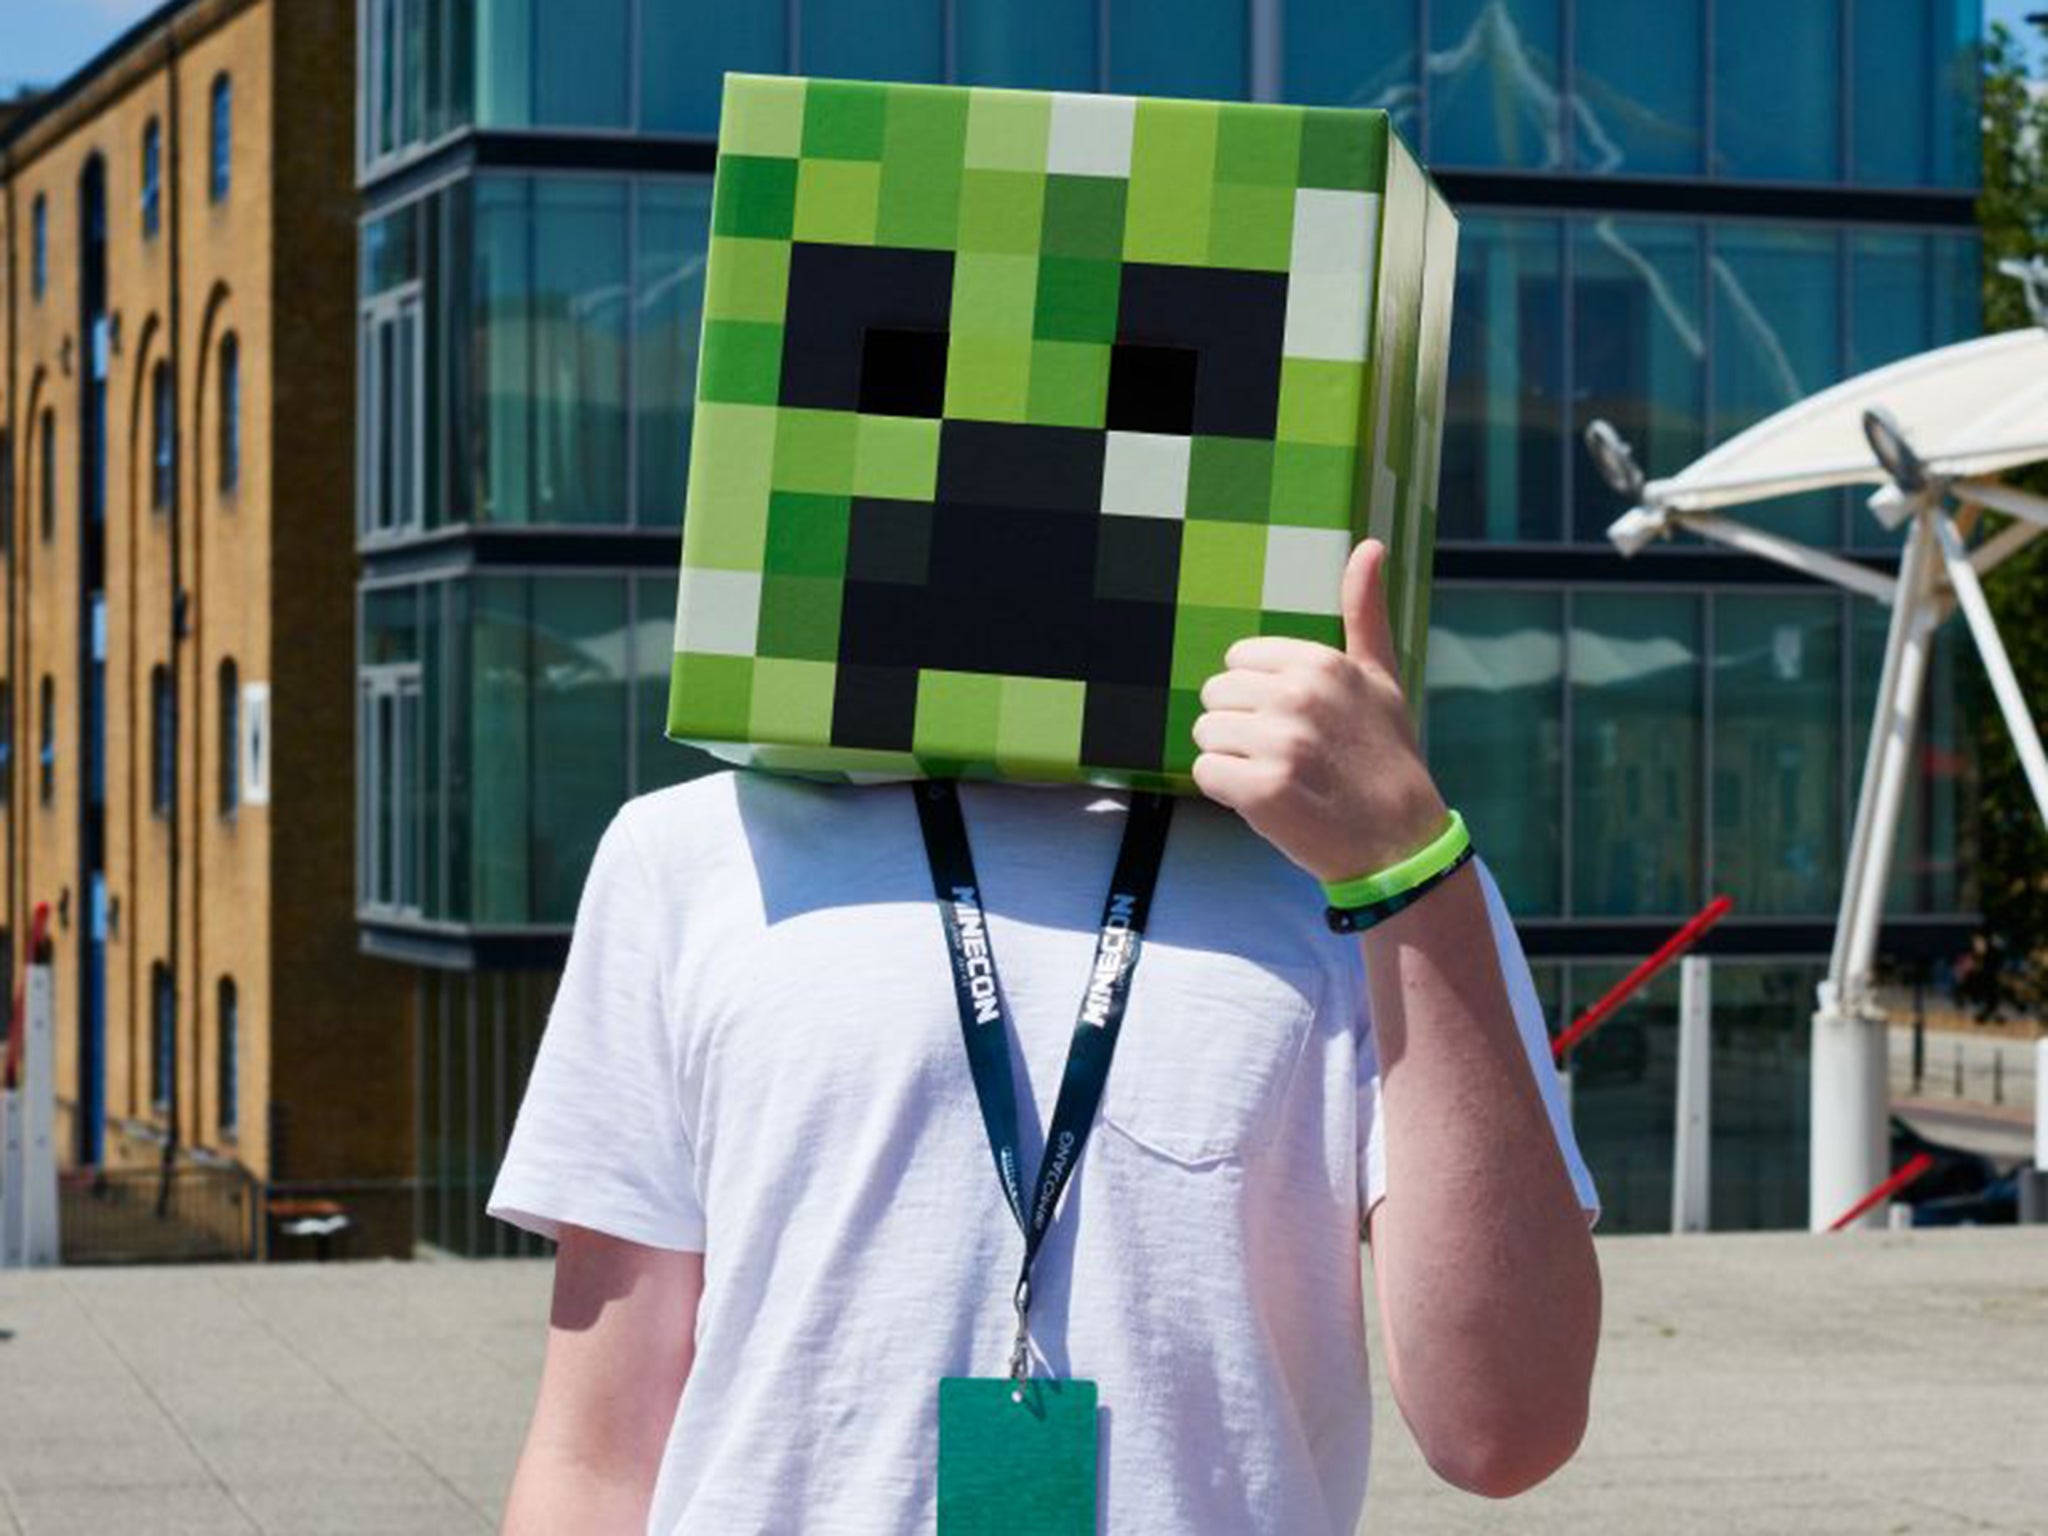 Minecraft fan Harry Olsen, 13, at the sold-out Minecon event in London on Saturday